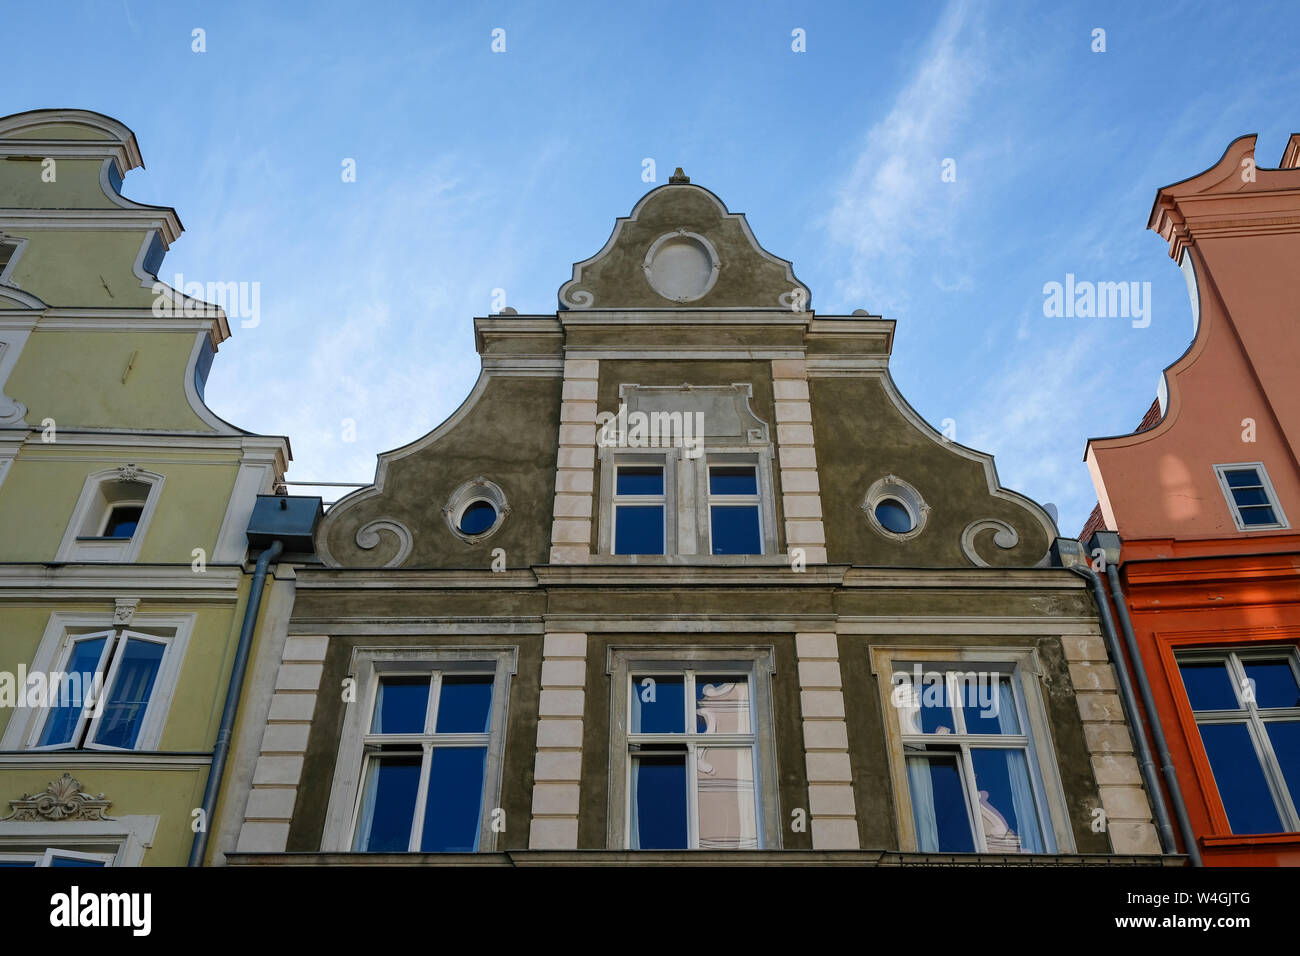 Germany, Stralsund, facade of historic gable house Stock Photo